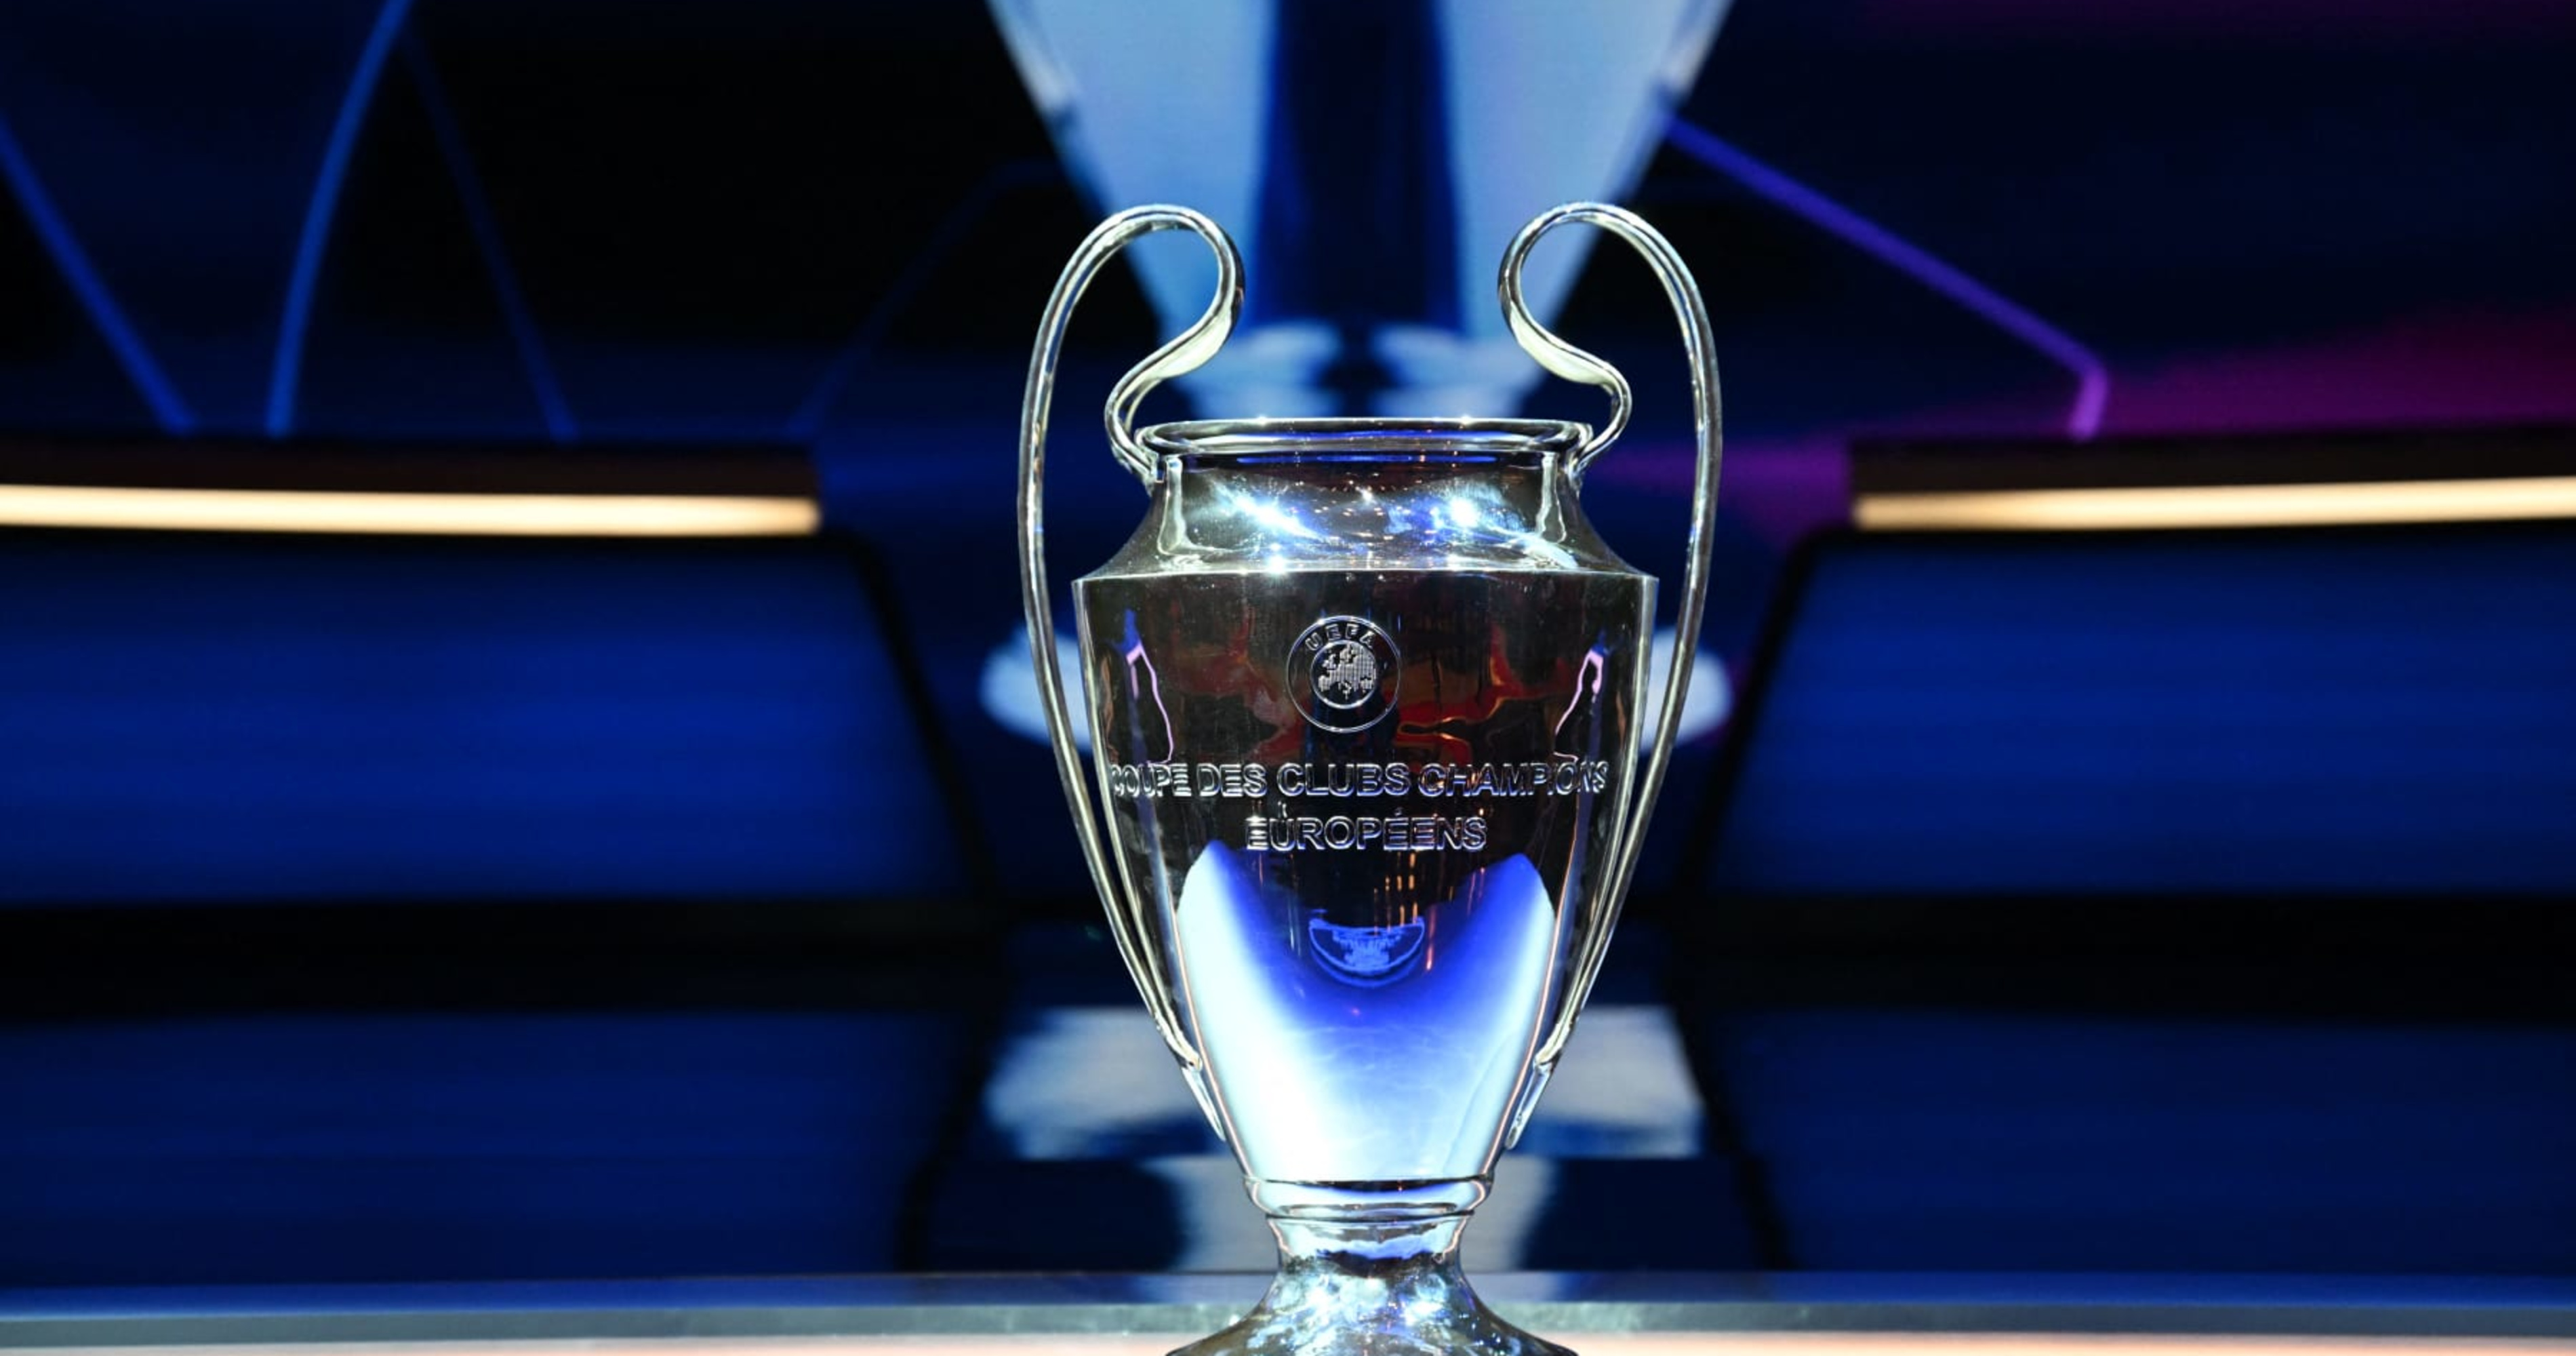 Meet the Champions League group stage teams, UEFA Champions League